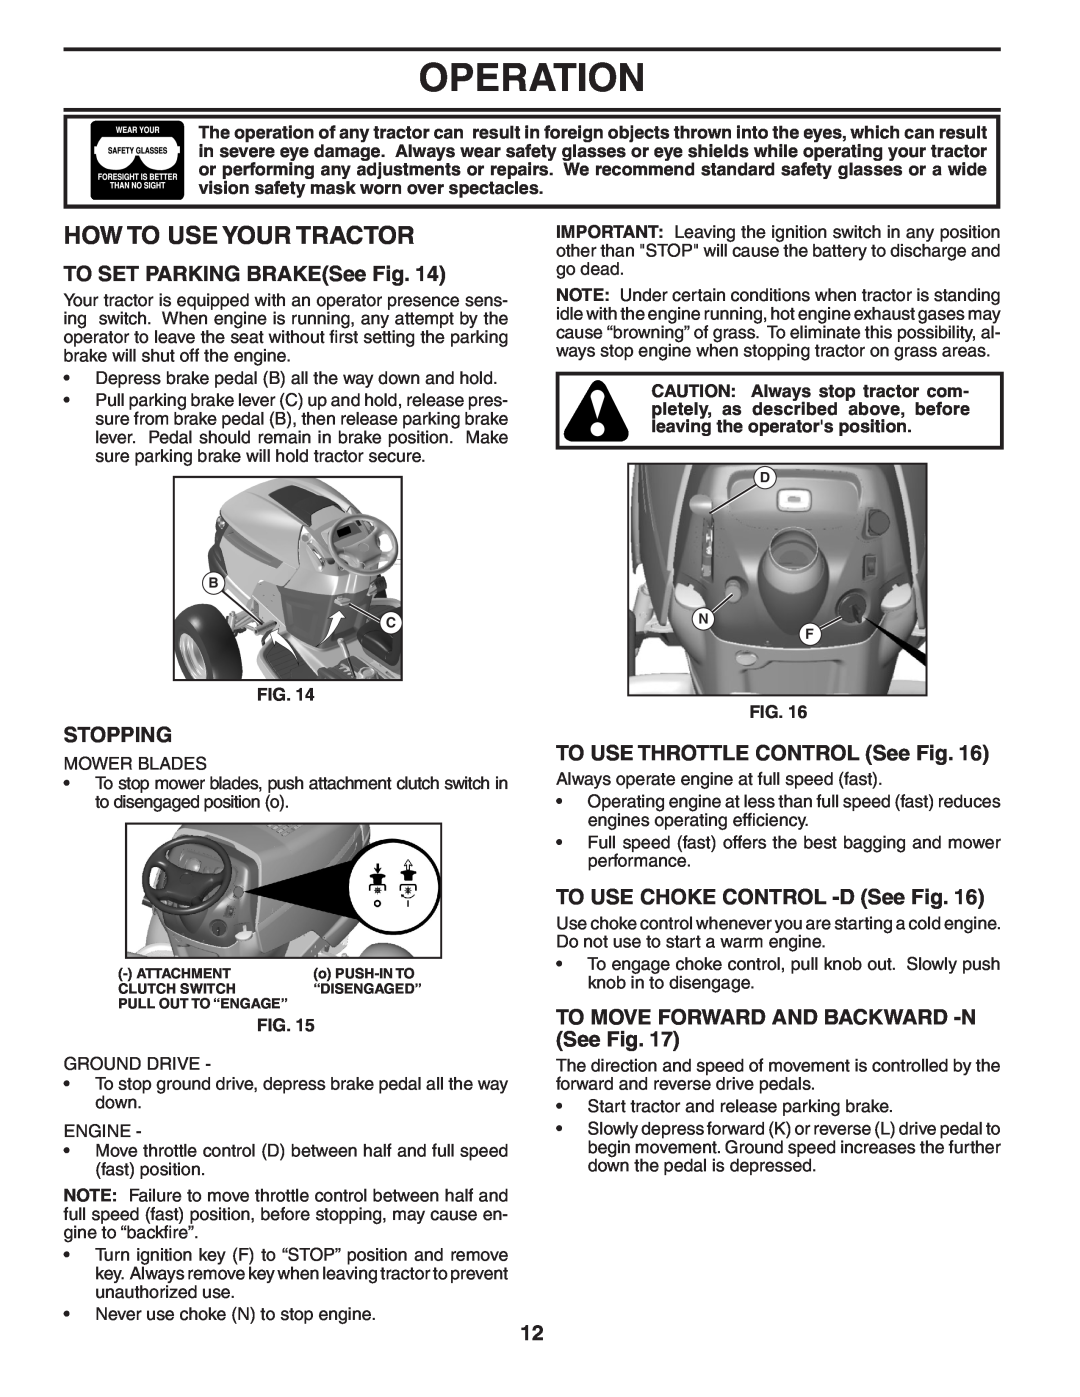 Poulan 402495 How To Use Your Tractor, TO SET PARKING BRAKESee Fig, Stopping, TO USE THROTTLE CONTROL See Fig, Operation 